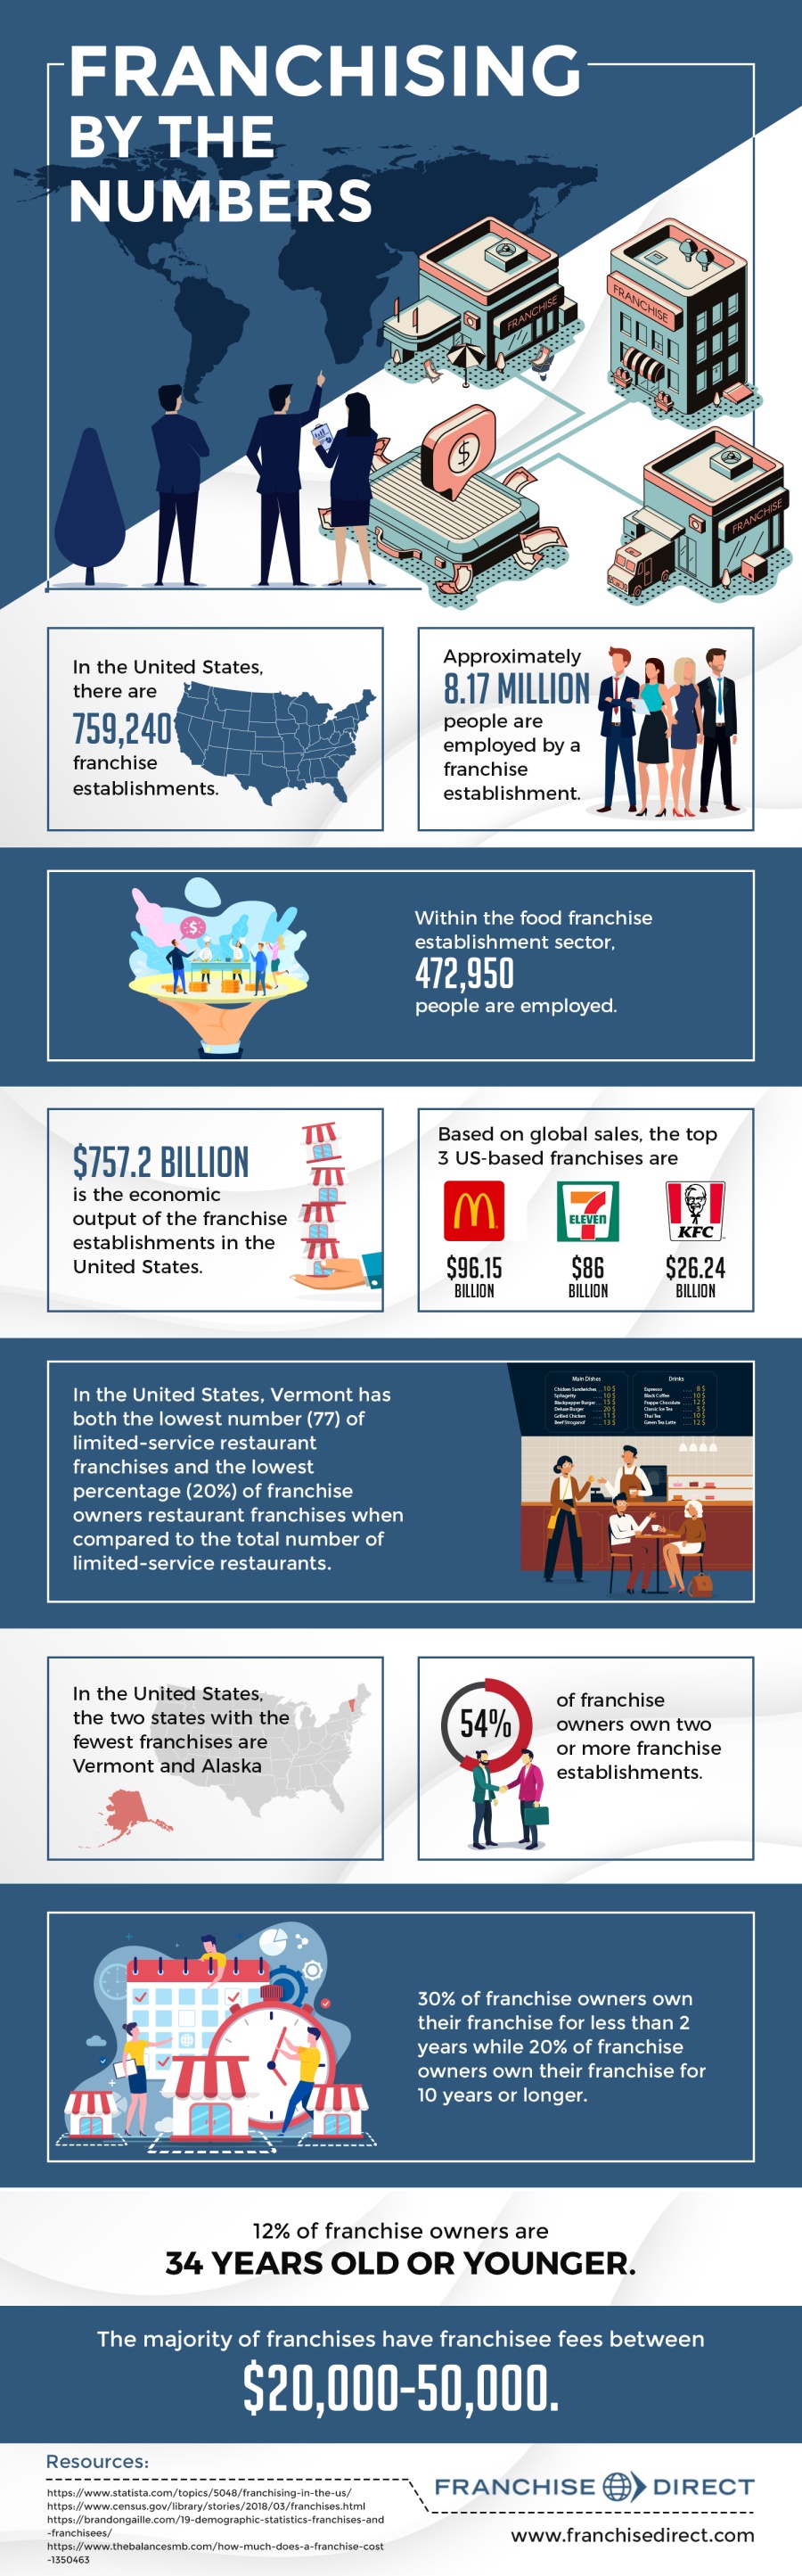 Franchising by the Numbers #infographic